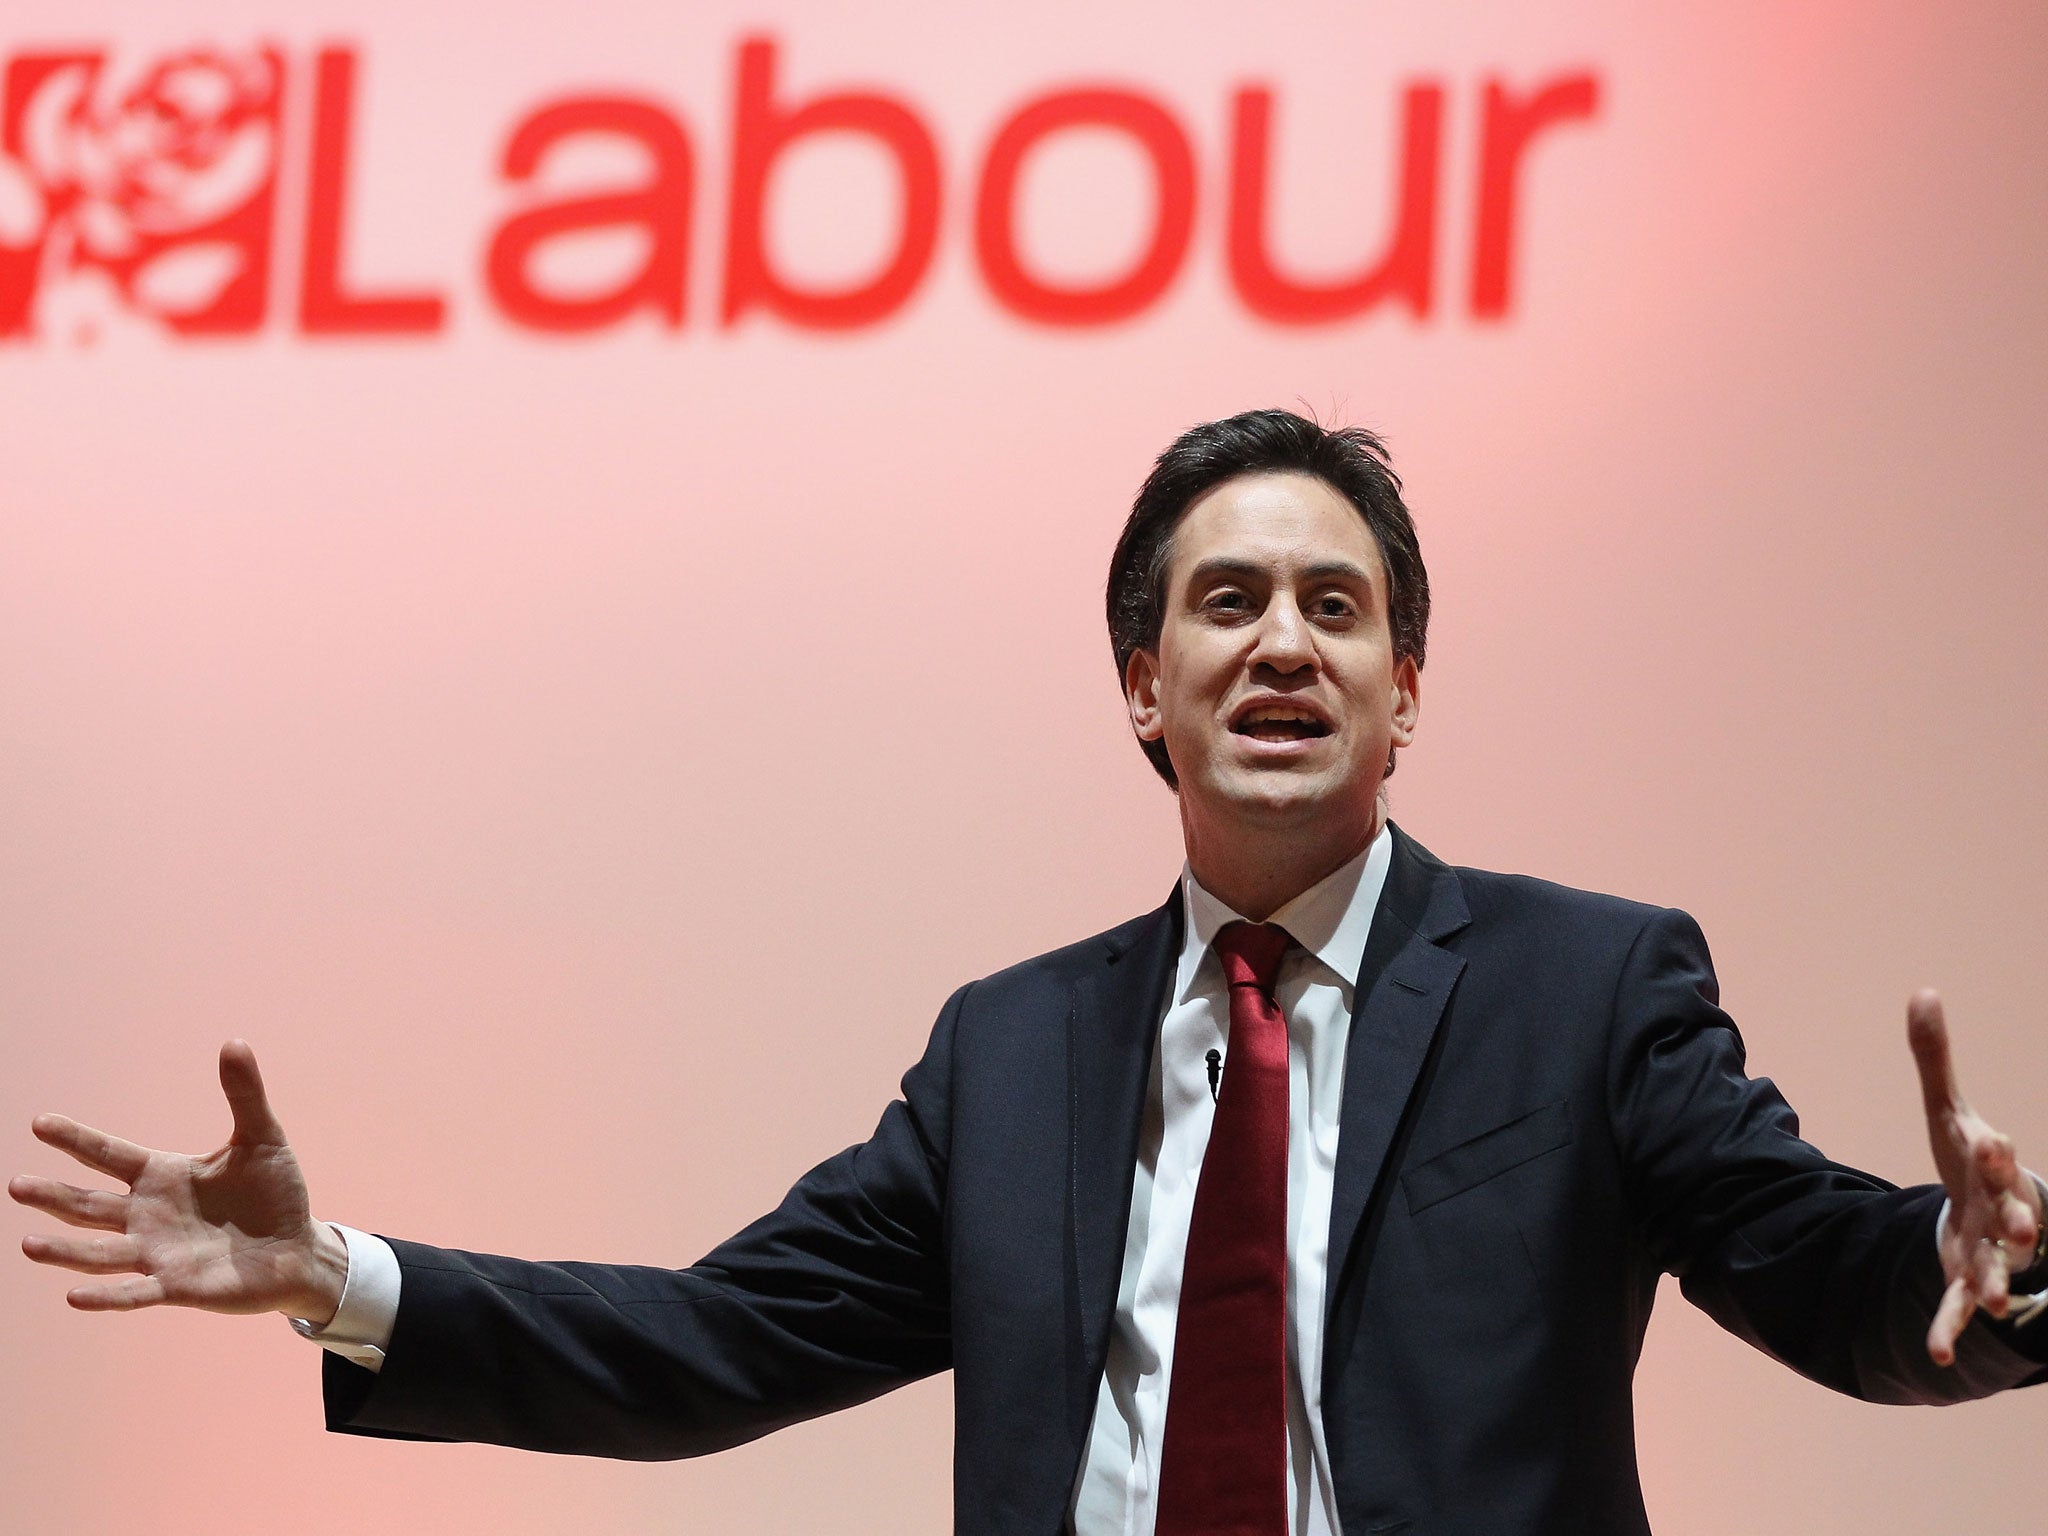 Ed Miliban has pledged to freeze gas and electricity prices for 20 months if Labour wins power